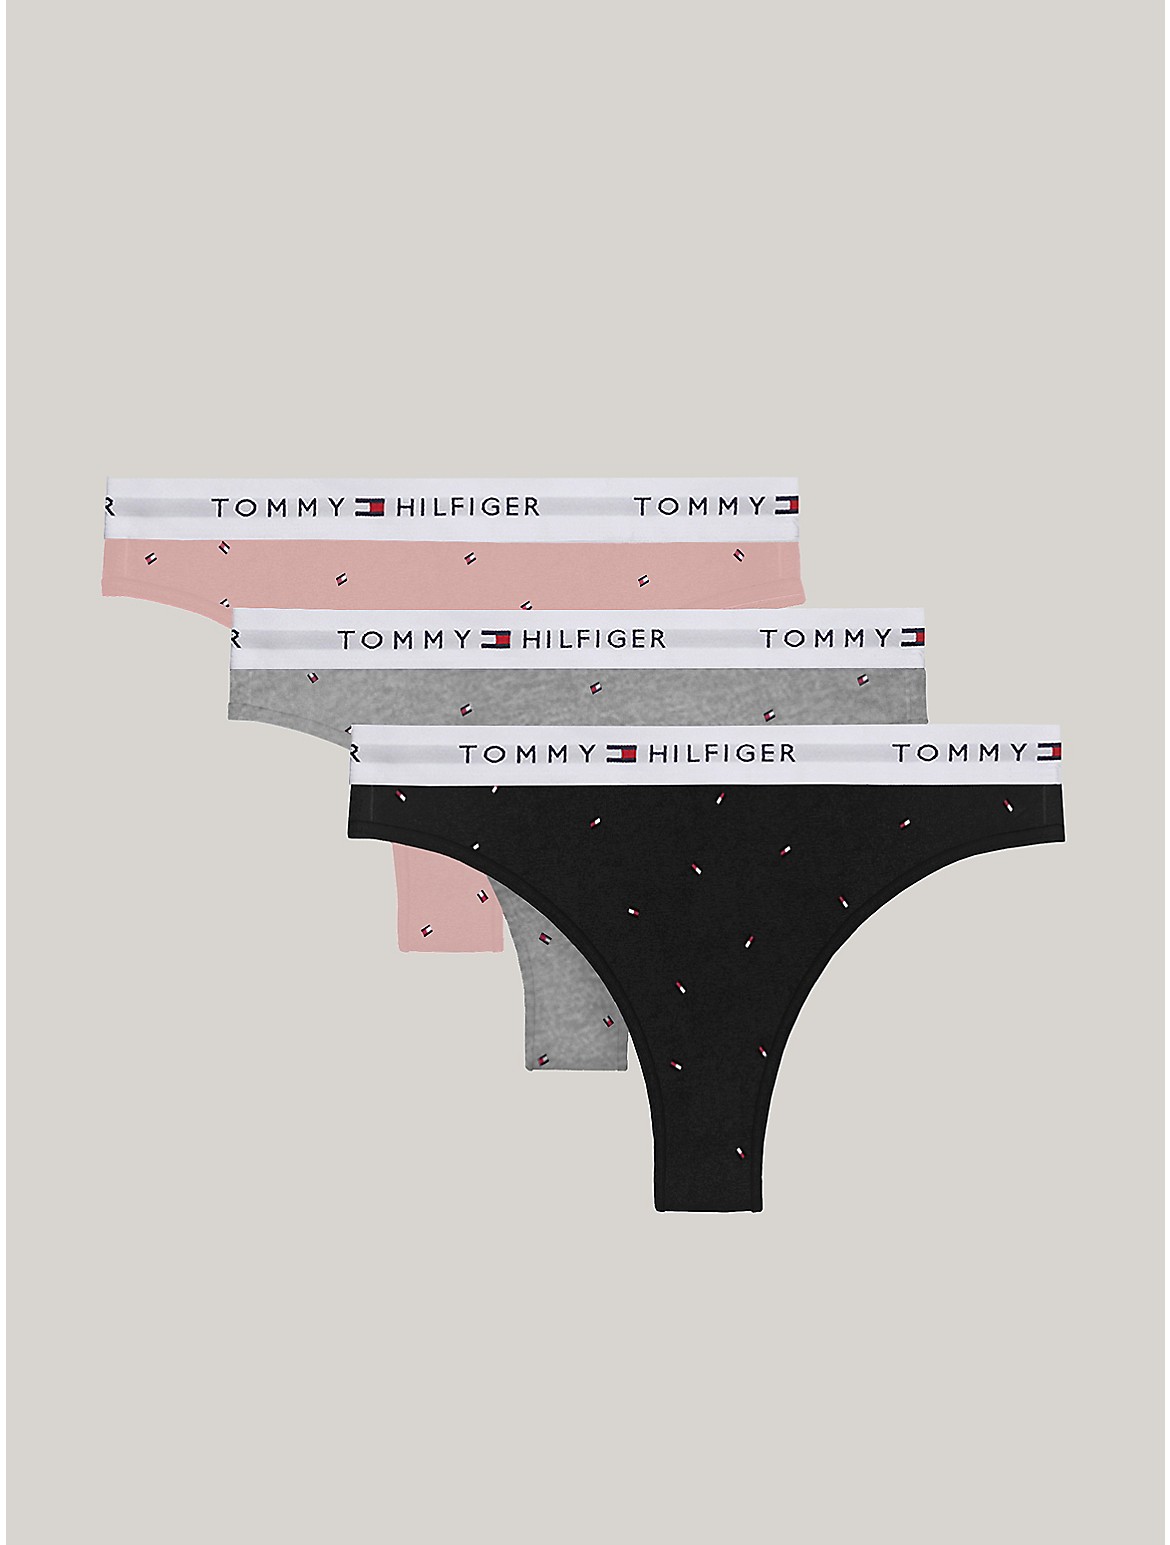 Tommy Hilfiger Cotton Classic Thong 3pk In Pink/grey/black Mini Flag